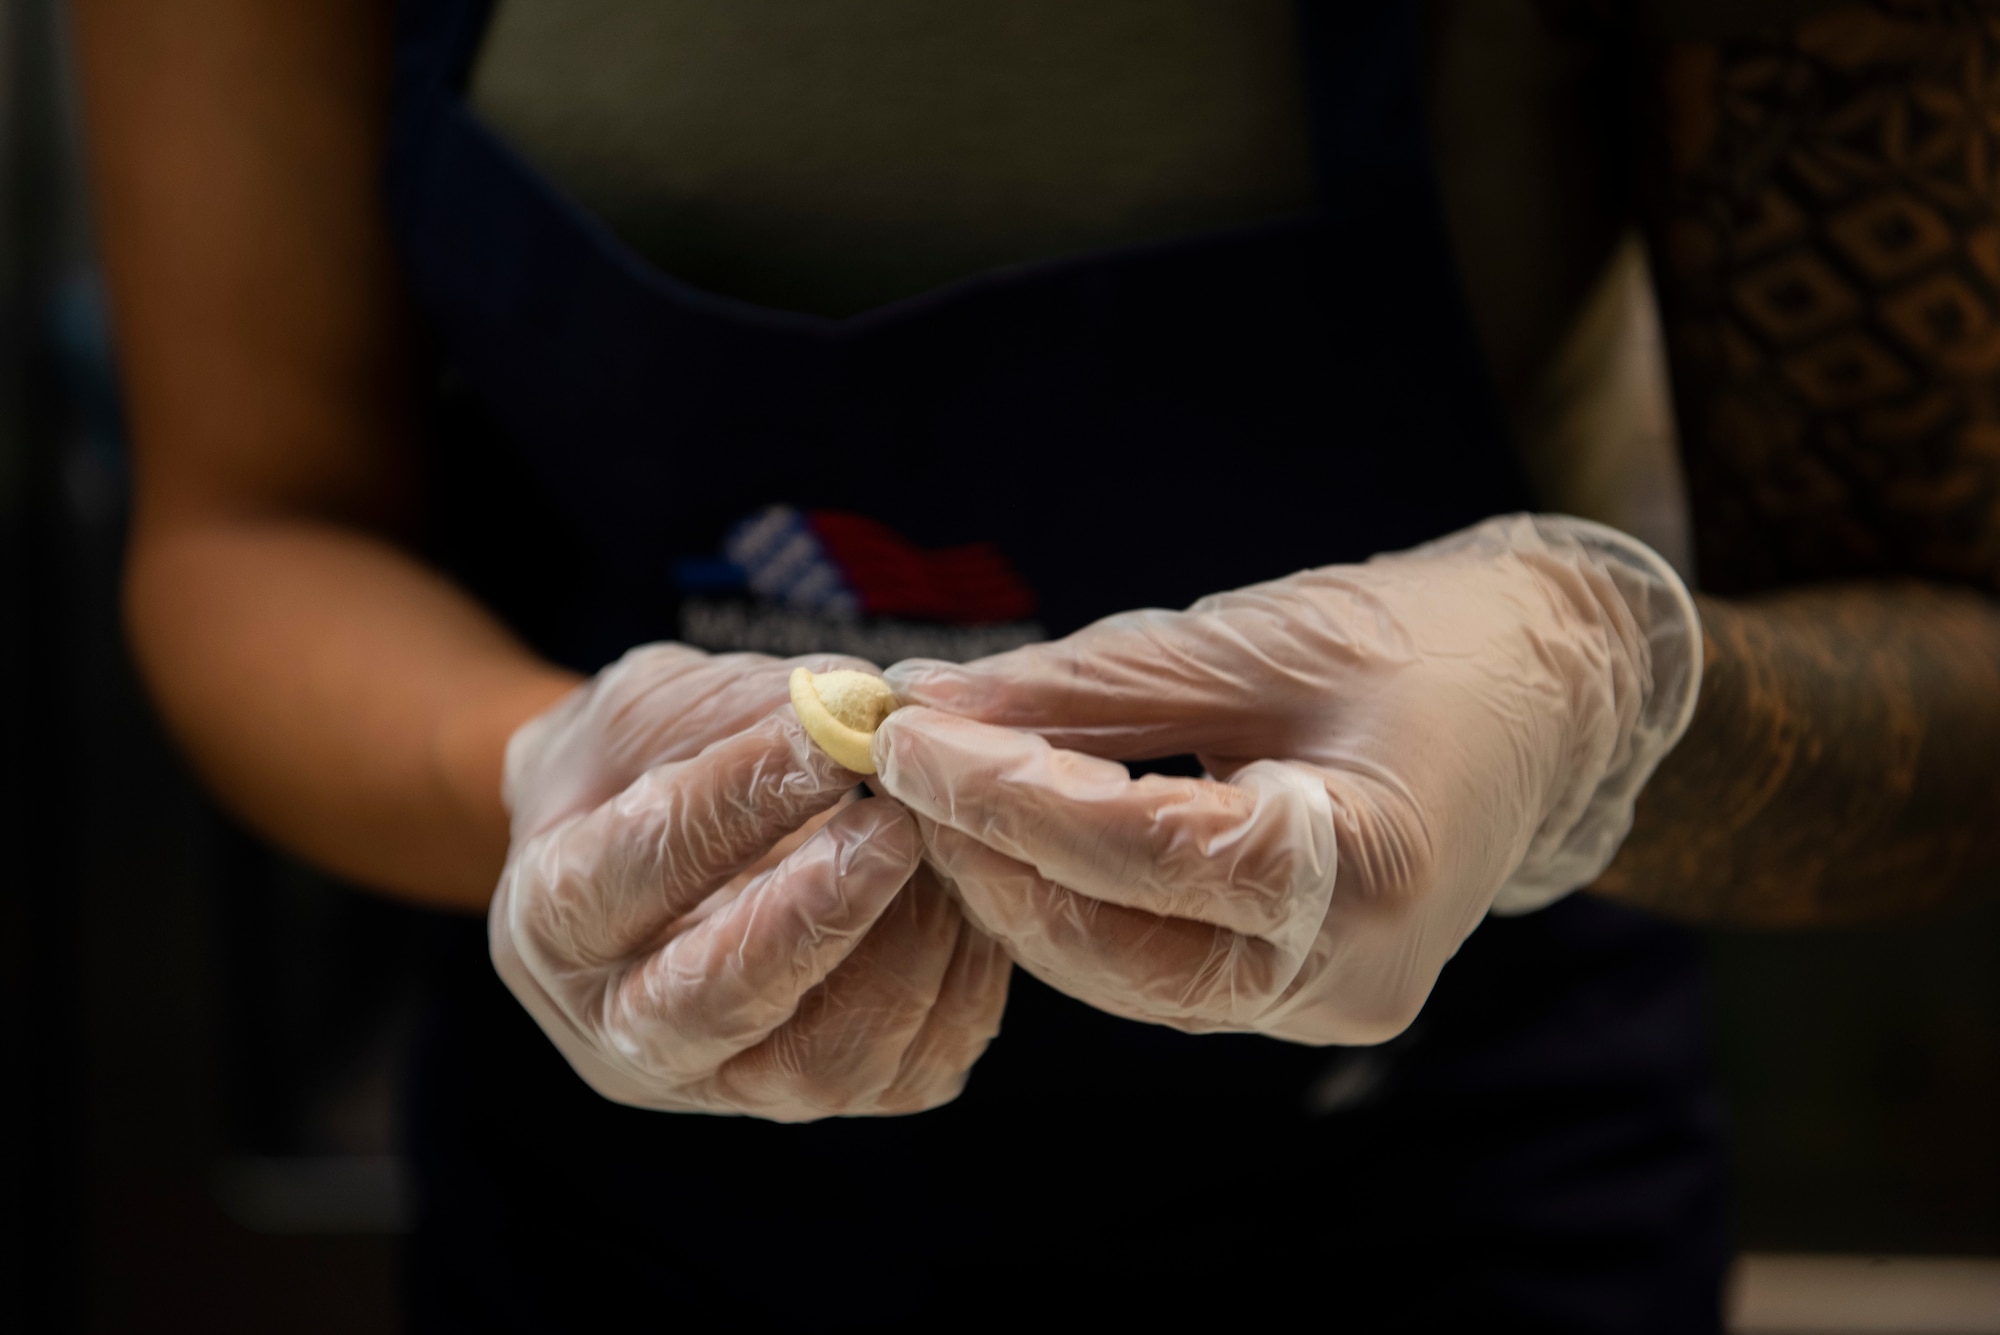 Senior Airman Angela Bolanos, 90th Force Support Squadron ICBM food service specialist, forms freshly made orecchiette pasta nine-minutes before the cooking competition ends in order to complete her teams dish Oct 15, 2019, at F.E. Warren Air Force Base, Wyo. Bolanos’ team, Chop It Like It’s Hot won the competition with what some of the judges called tender and just lamb stew. (U.S. Air Force photo by Senior Airman Abbigayle Williams)